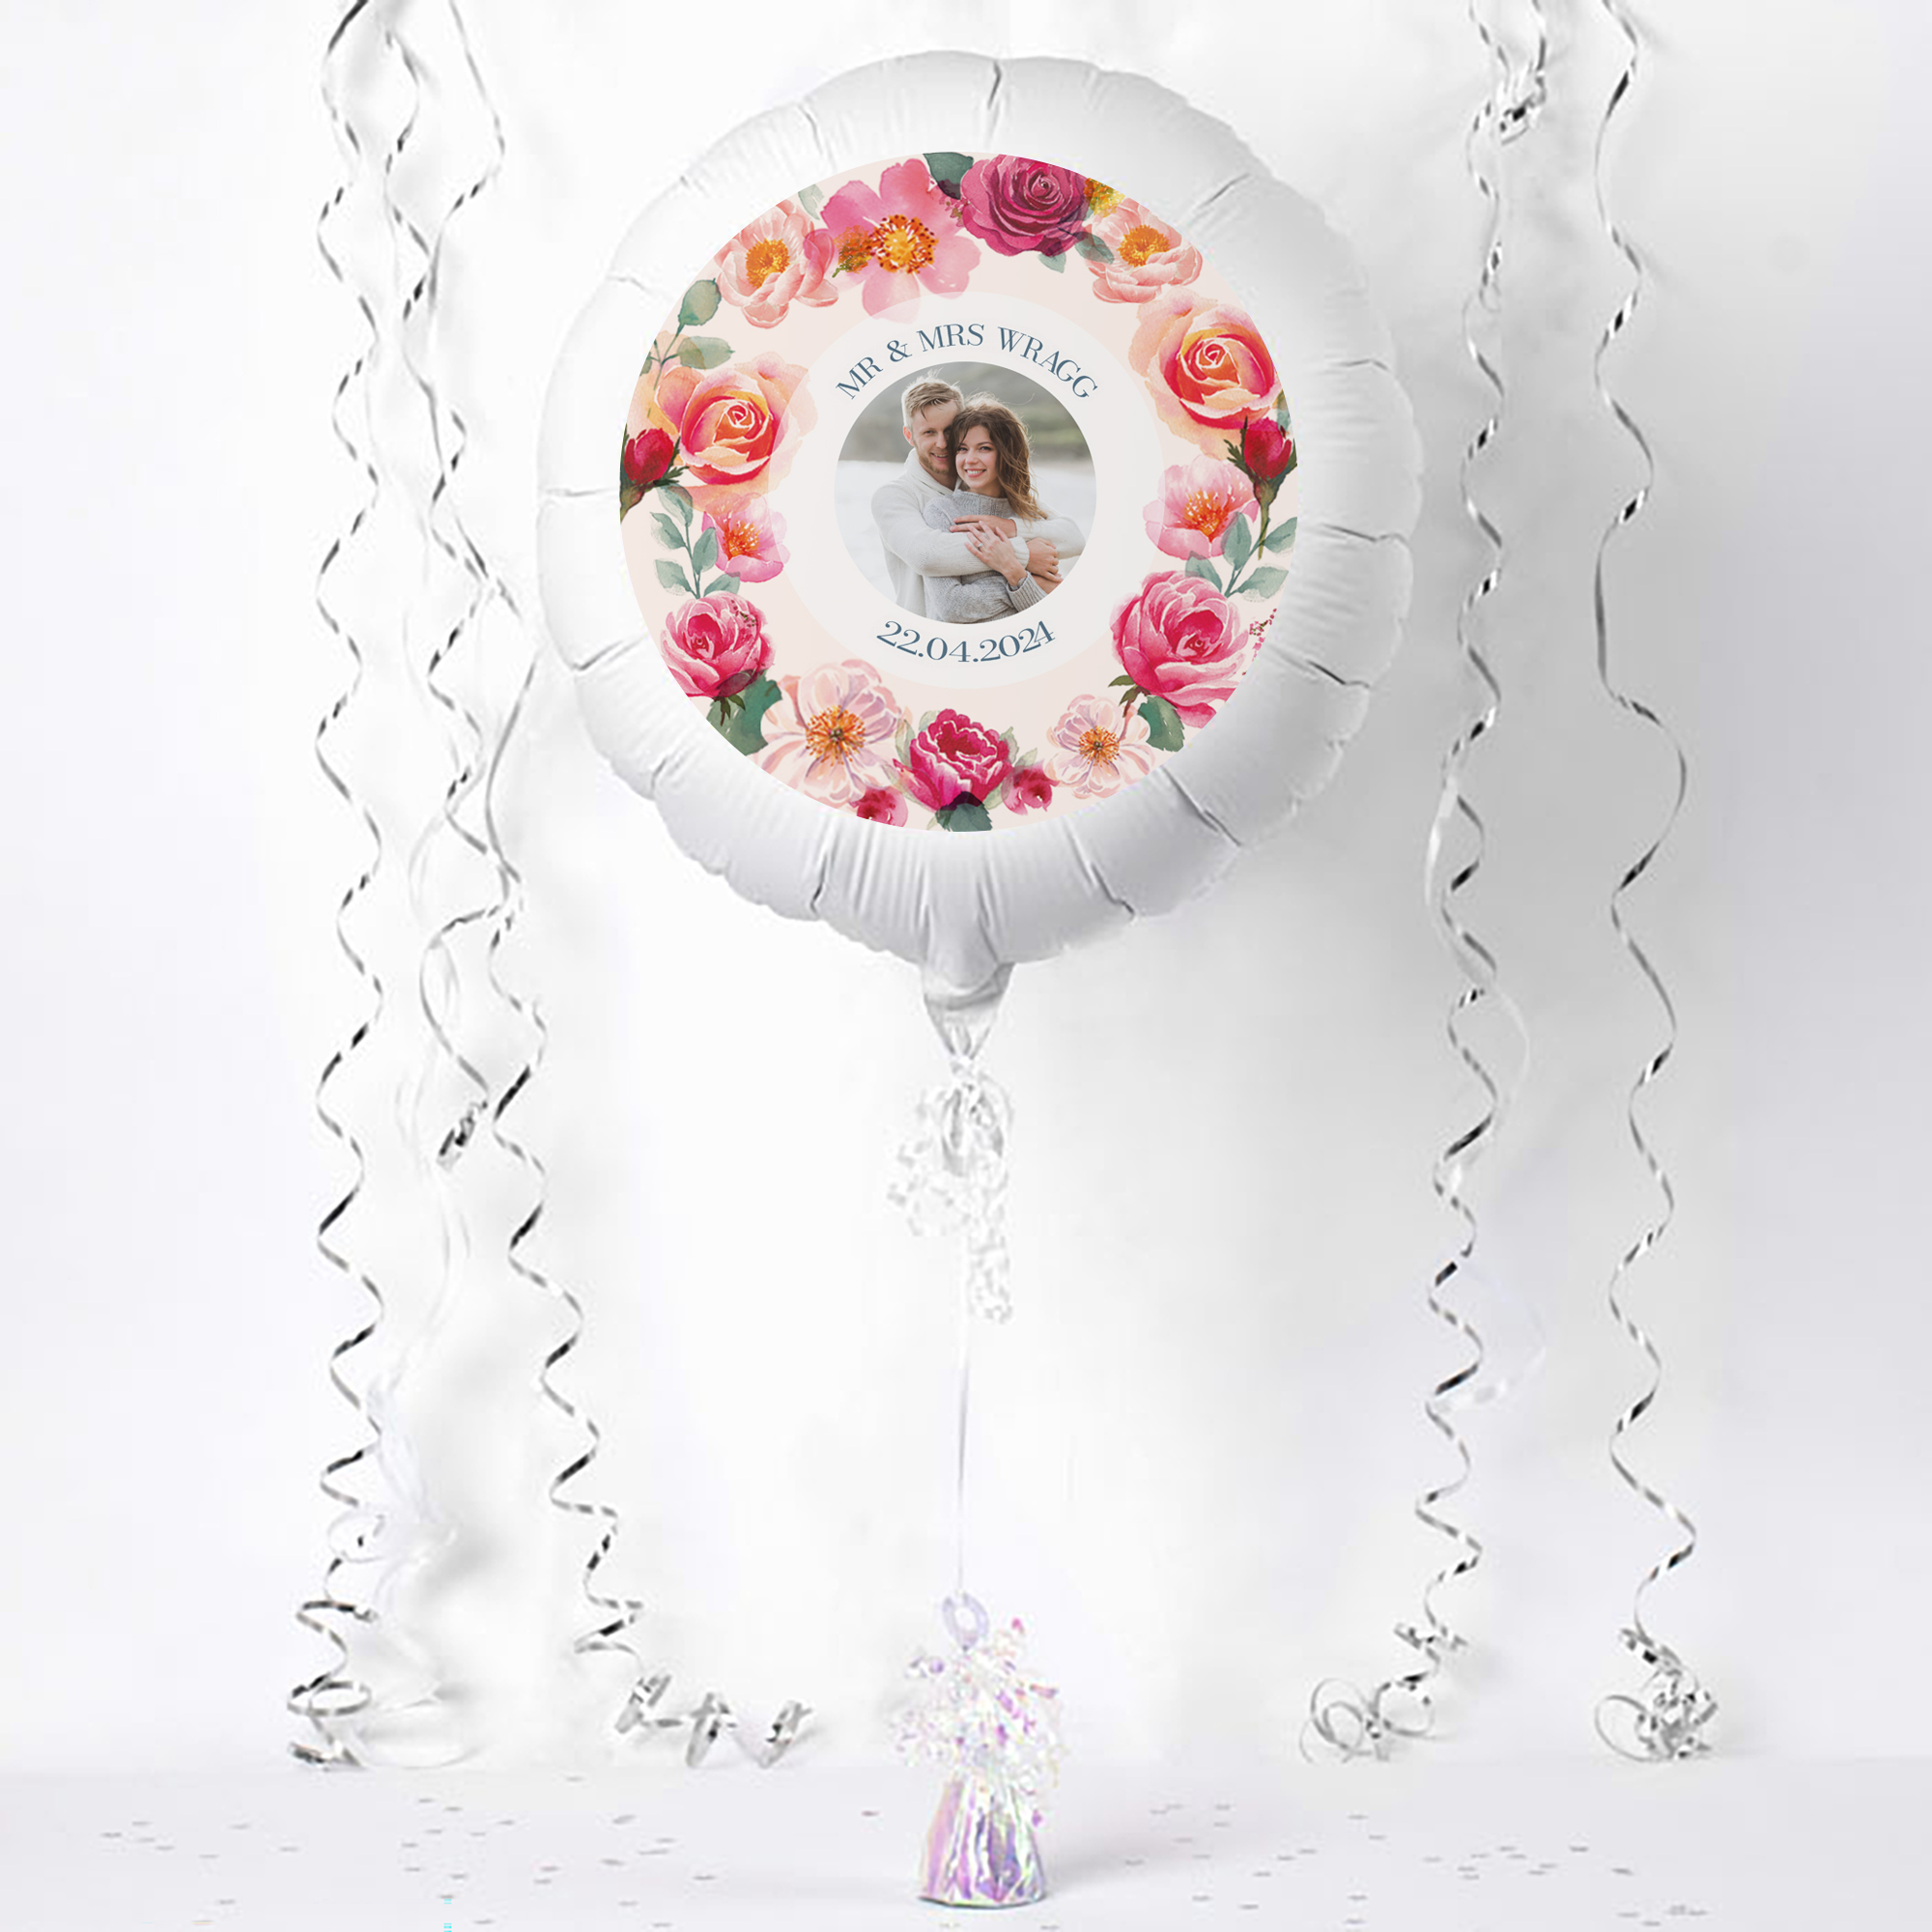 Personalised Photo Upload Large Helium Balloon - Floral Border, Any Message